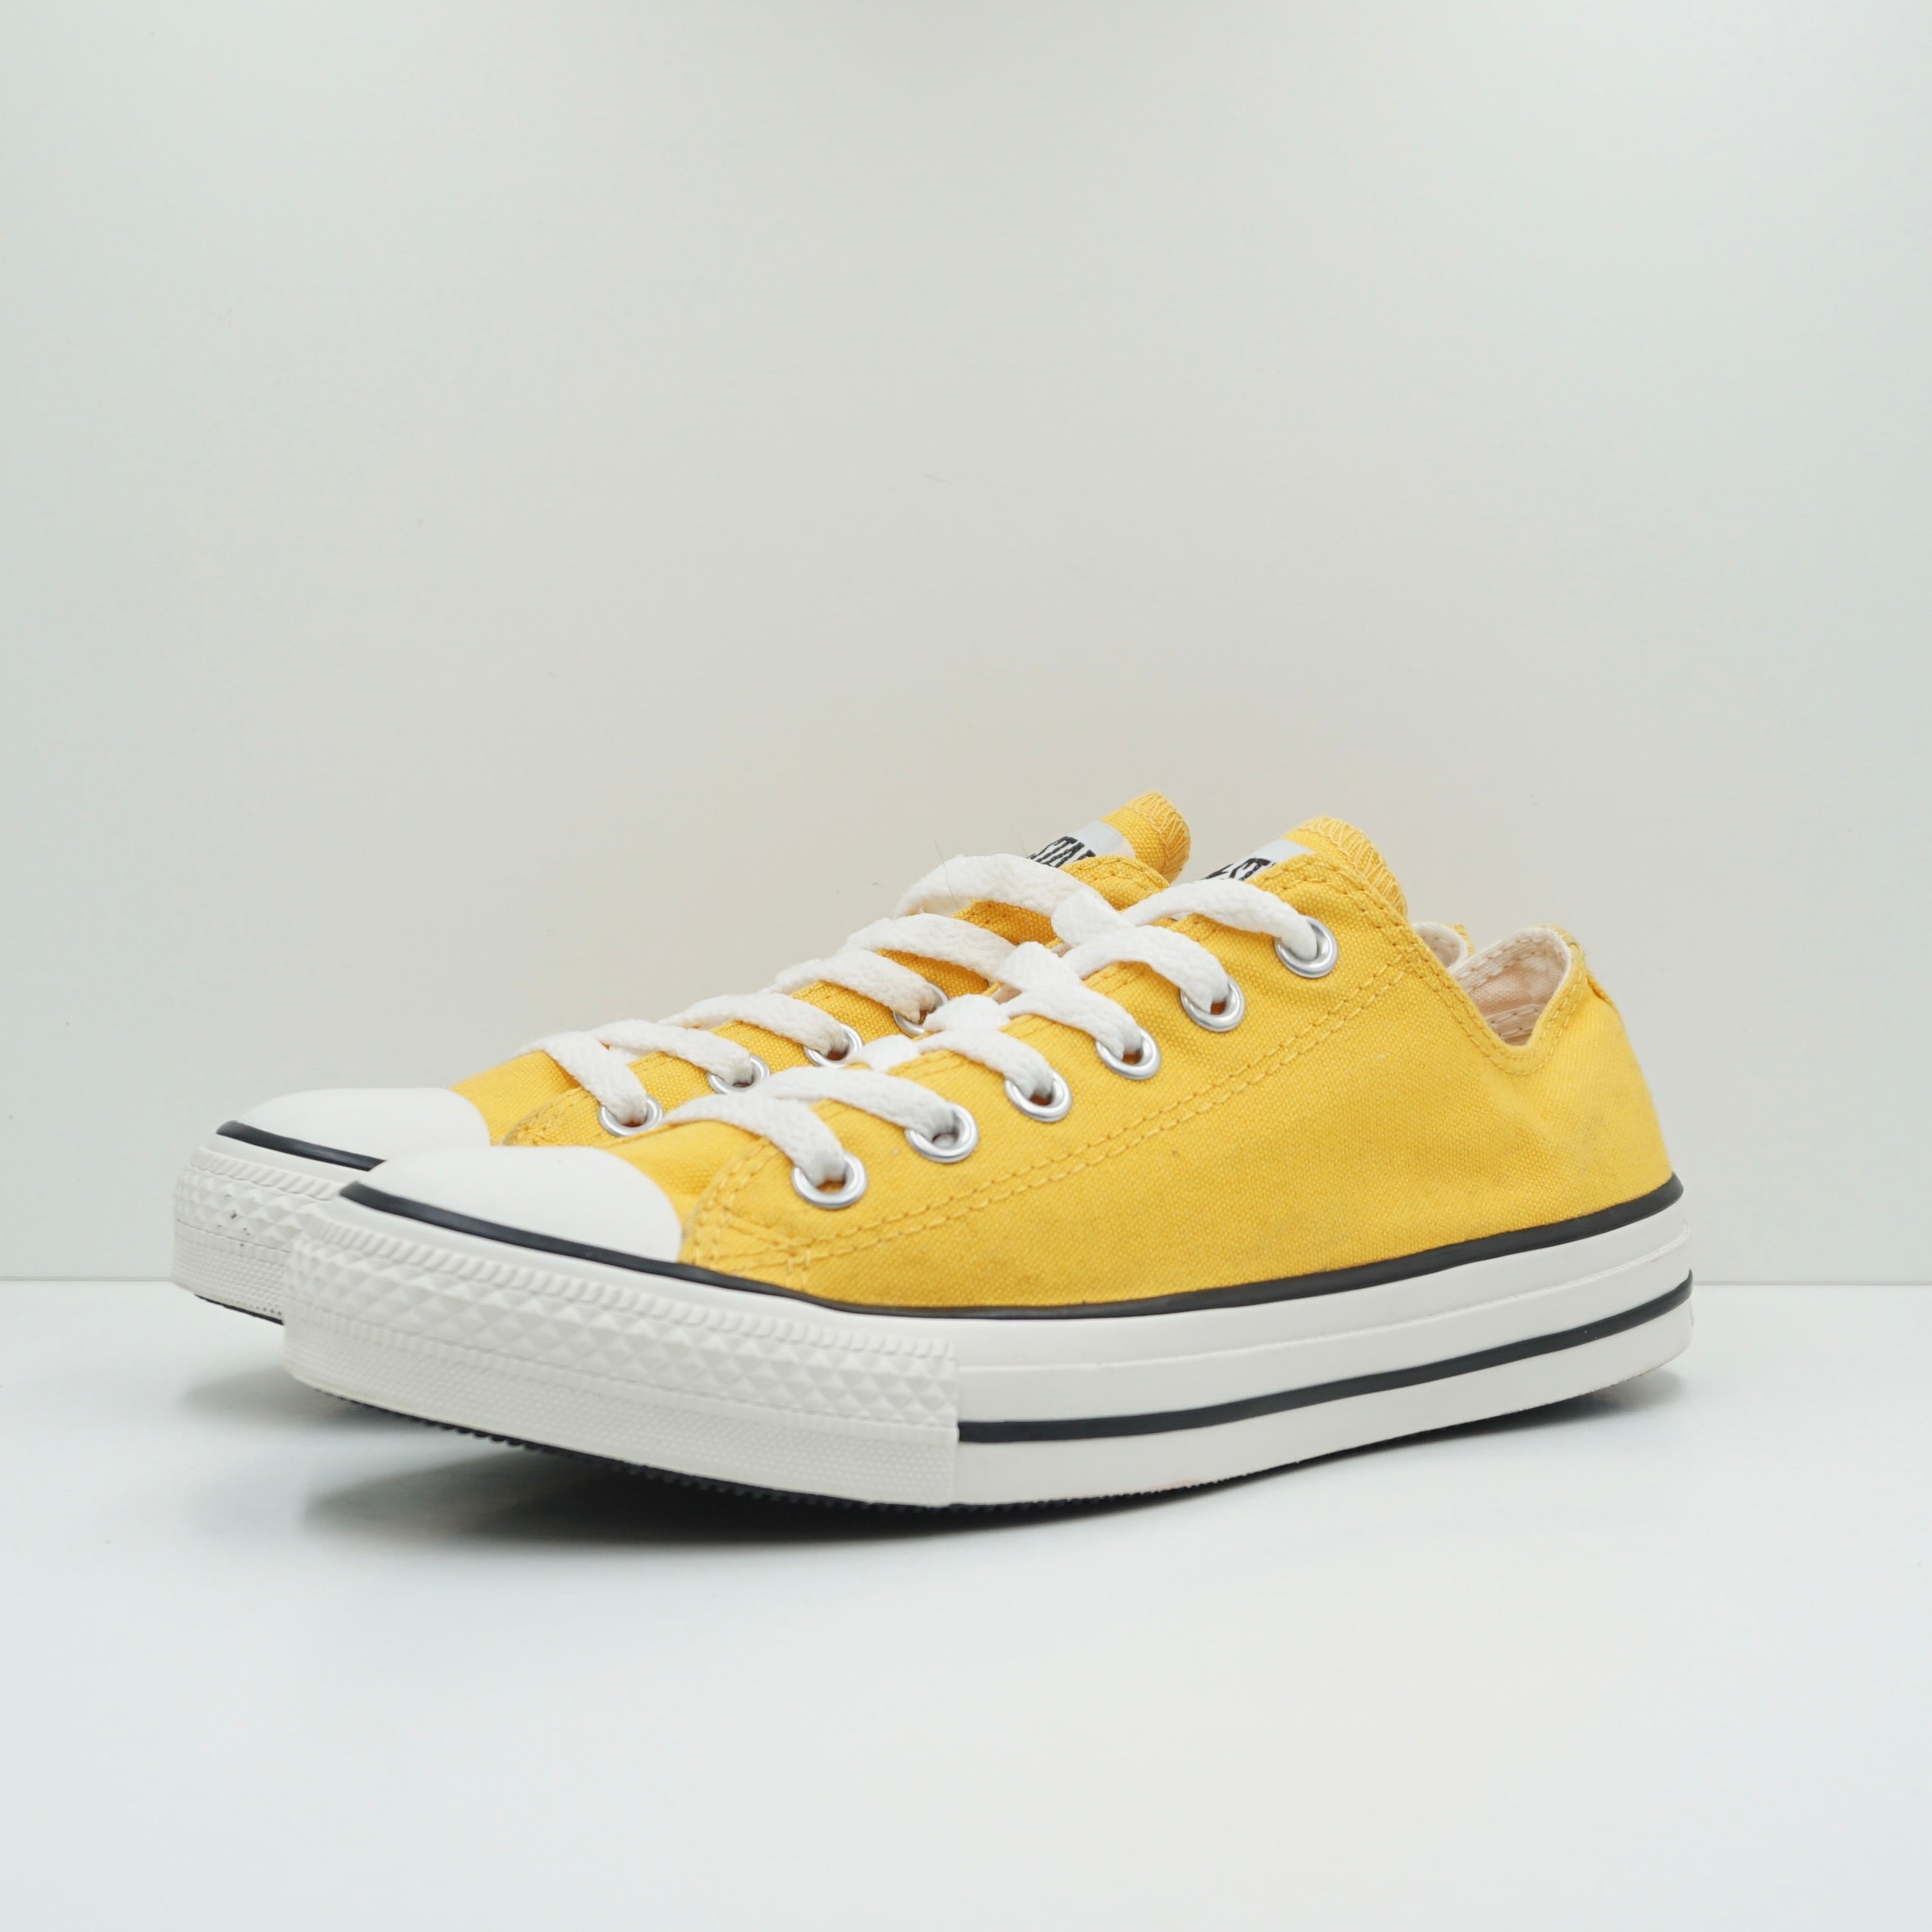 Converse Chuck Taylor All Star Low Yellow Sample